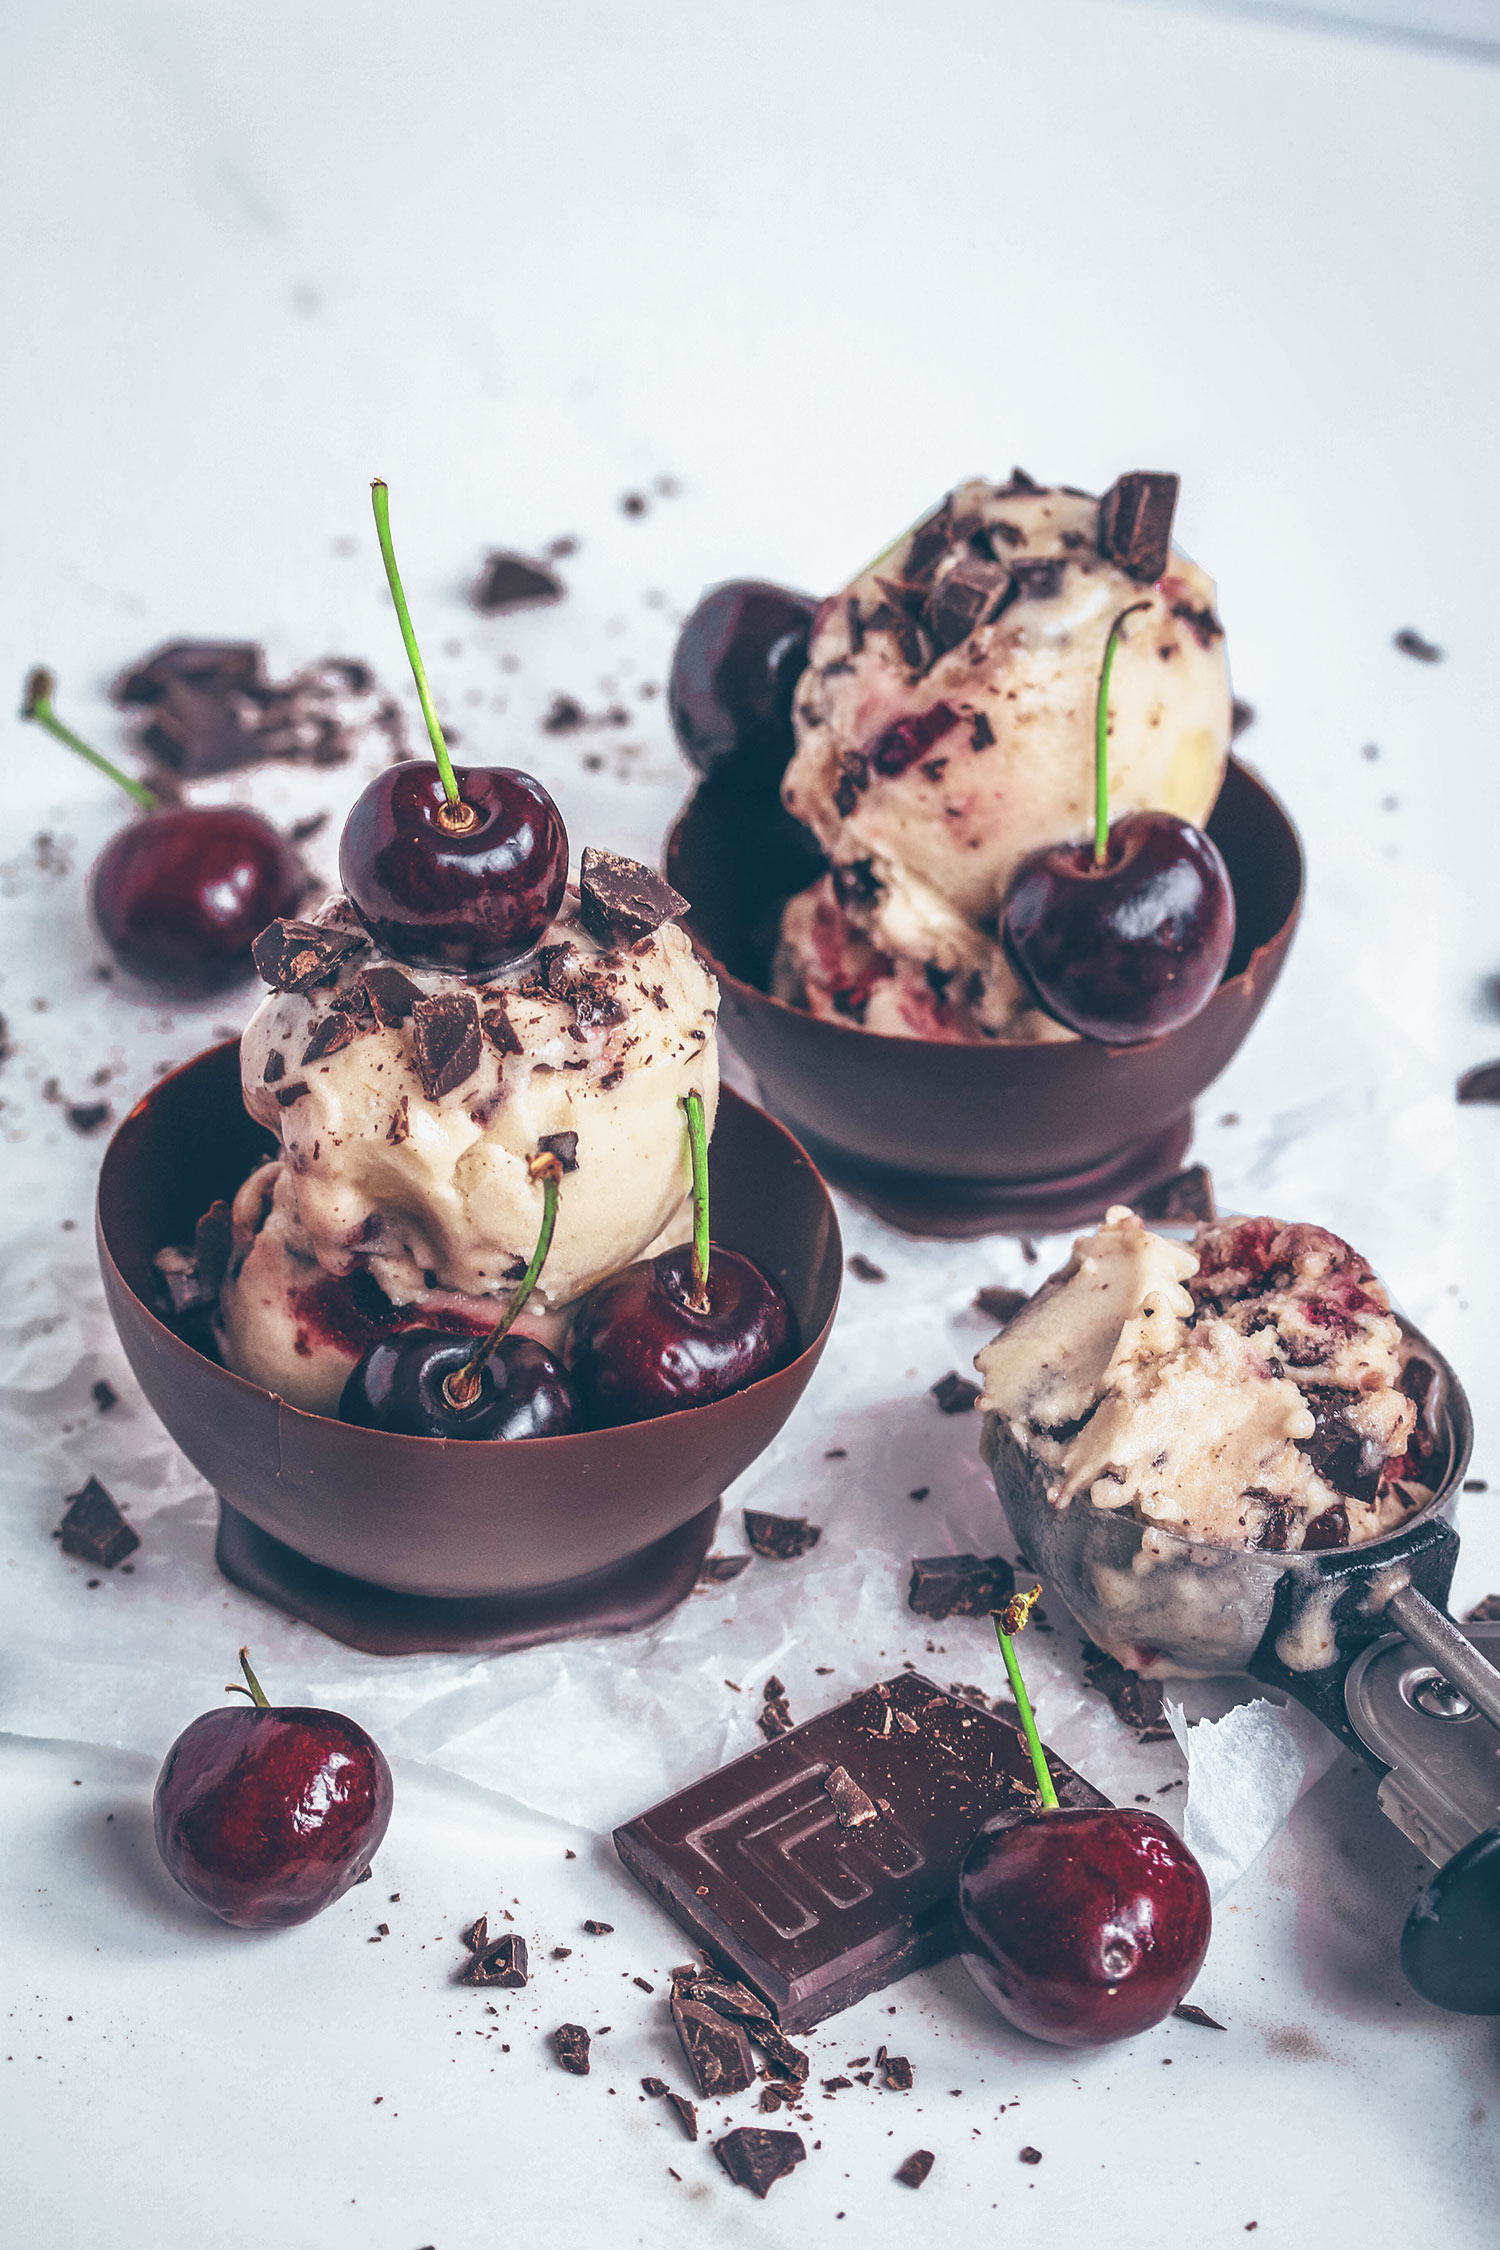 Chocolate Cups With Black Forest Banana Ice Cream Uk Health Blog Nadia S Healthy Kitchen,Queen Size Rag Quilt Patterns